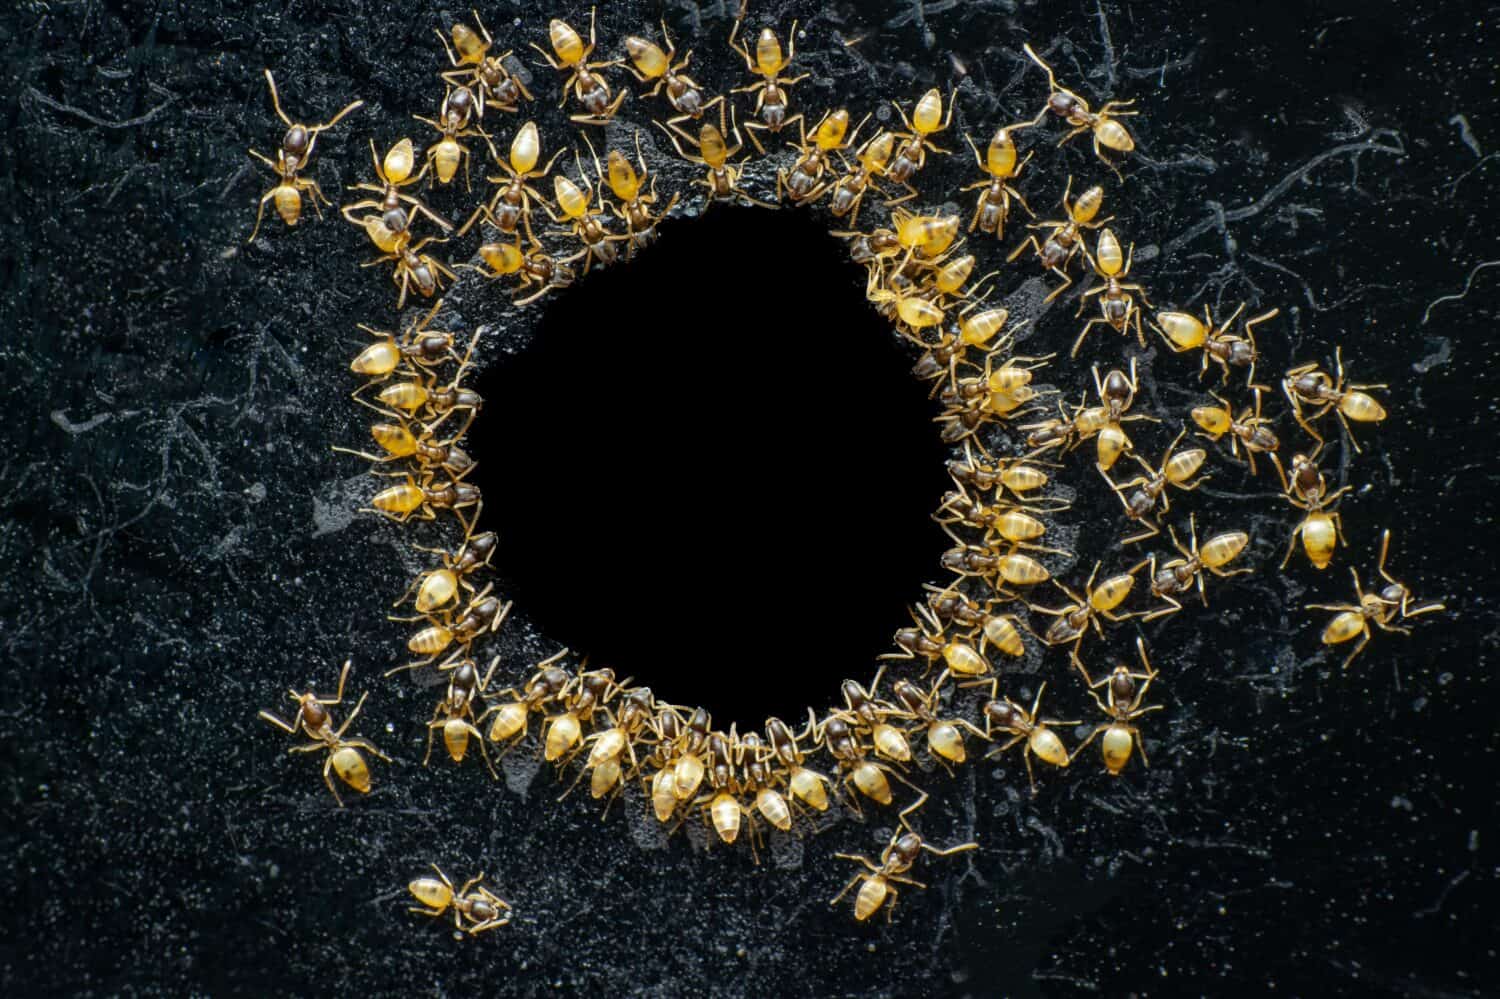 When a group of Humble ants or ghost ants , Tapinoma melanocephalum gathered for a meal.